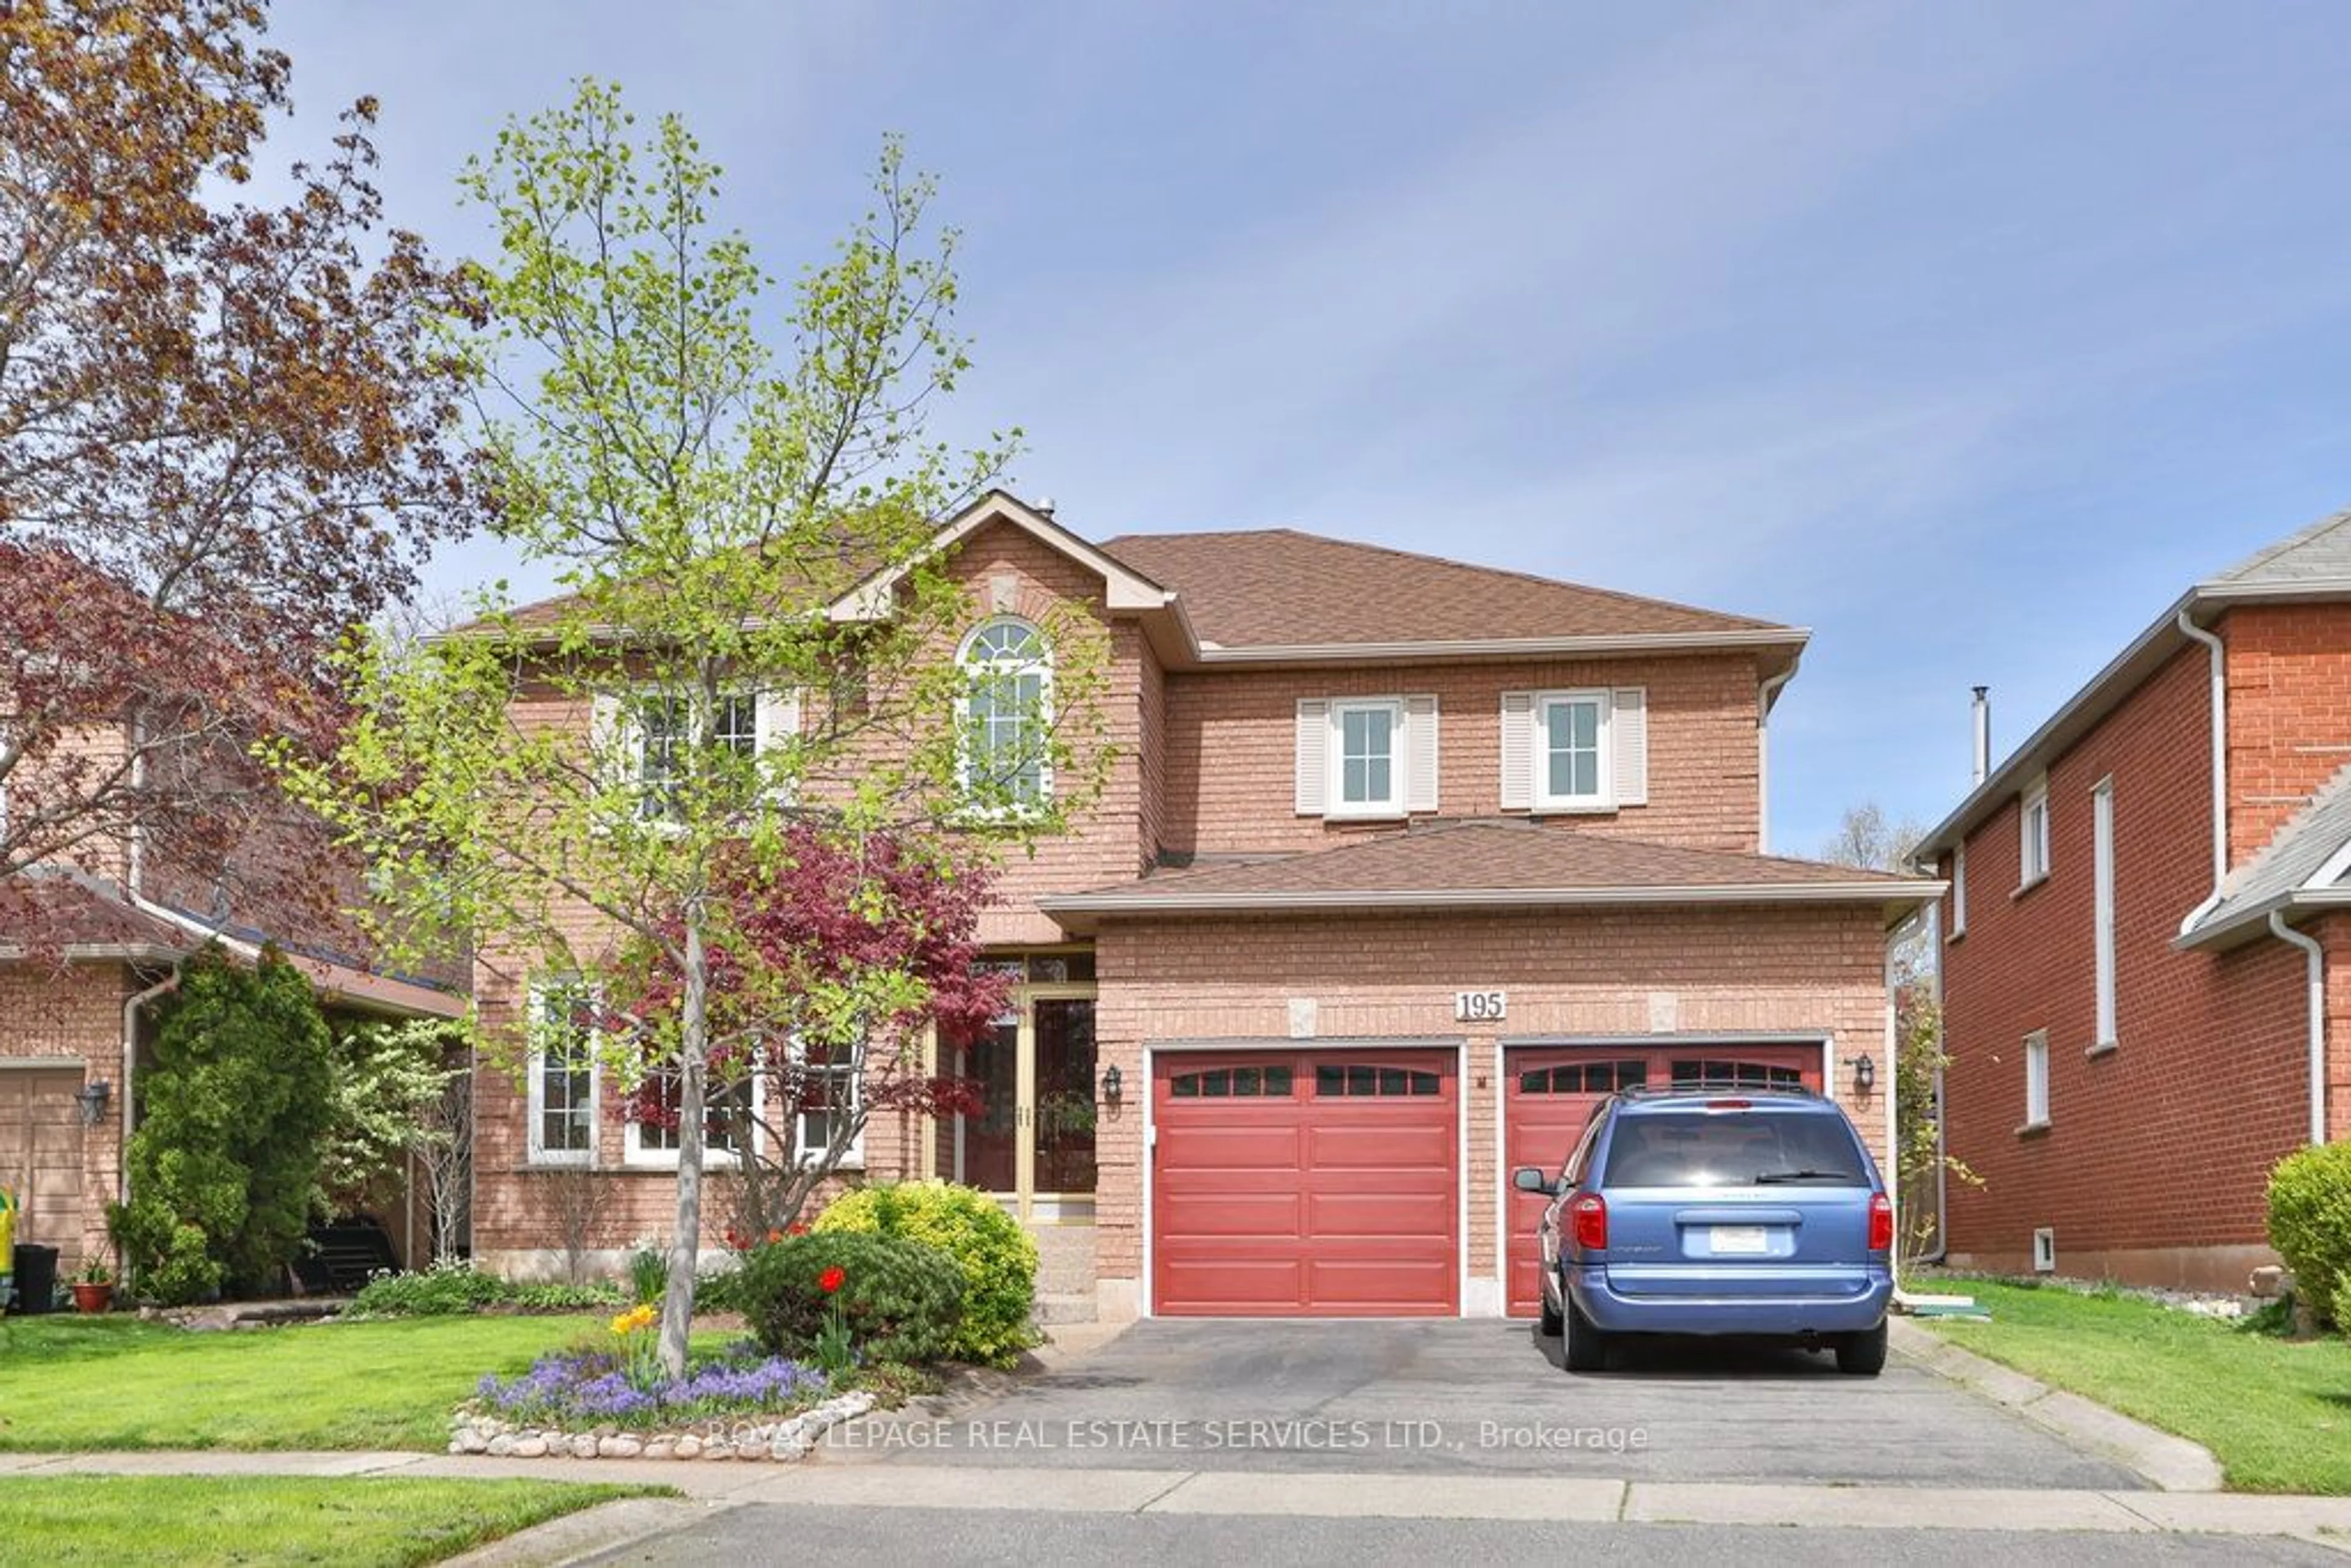 Home with brick exterior material for 195 Elderwood Tr, Oakville Ontario L6H 5W2